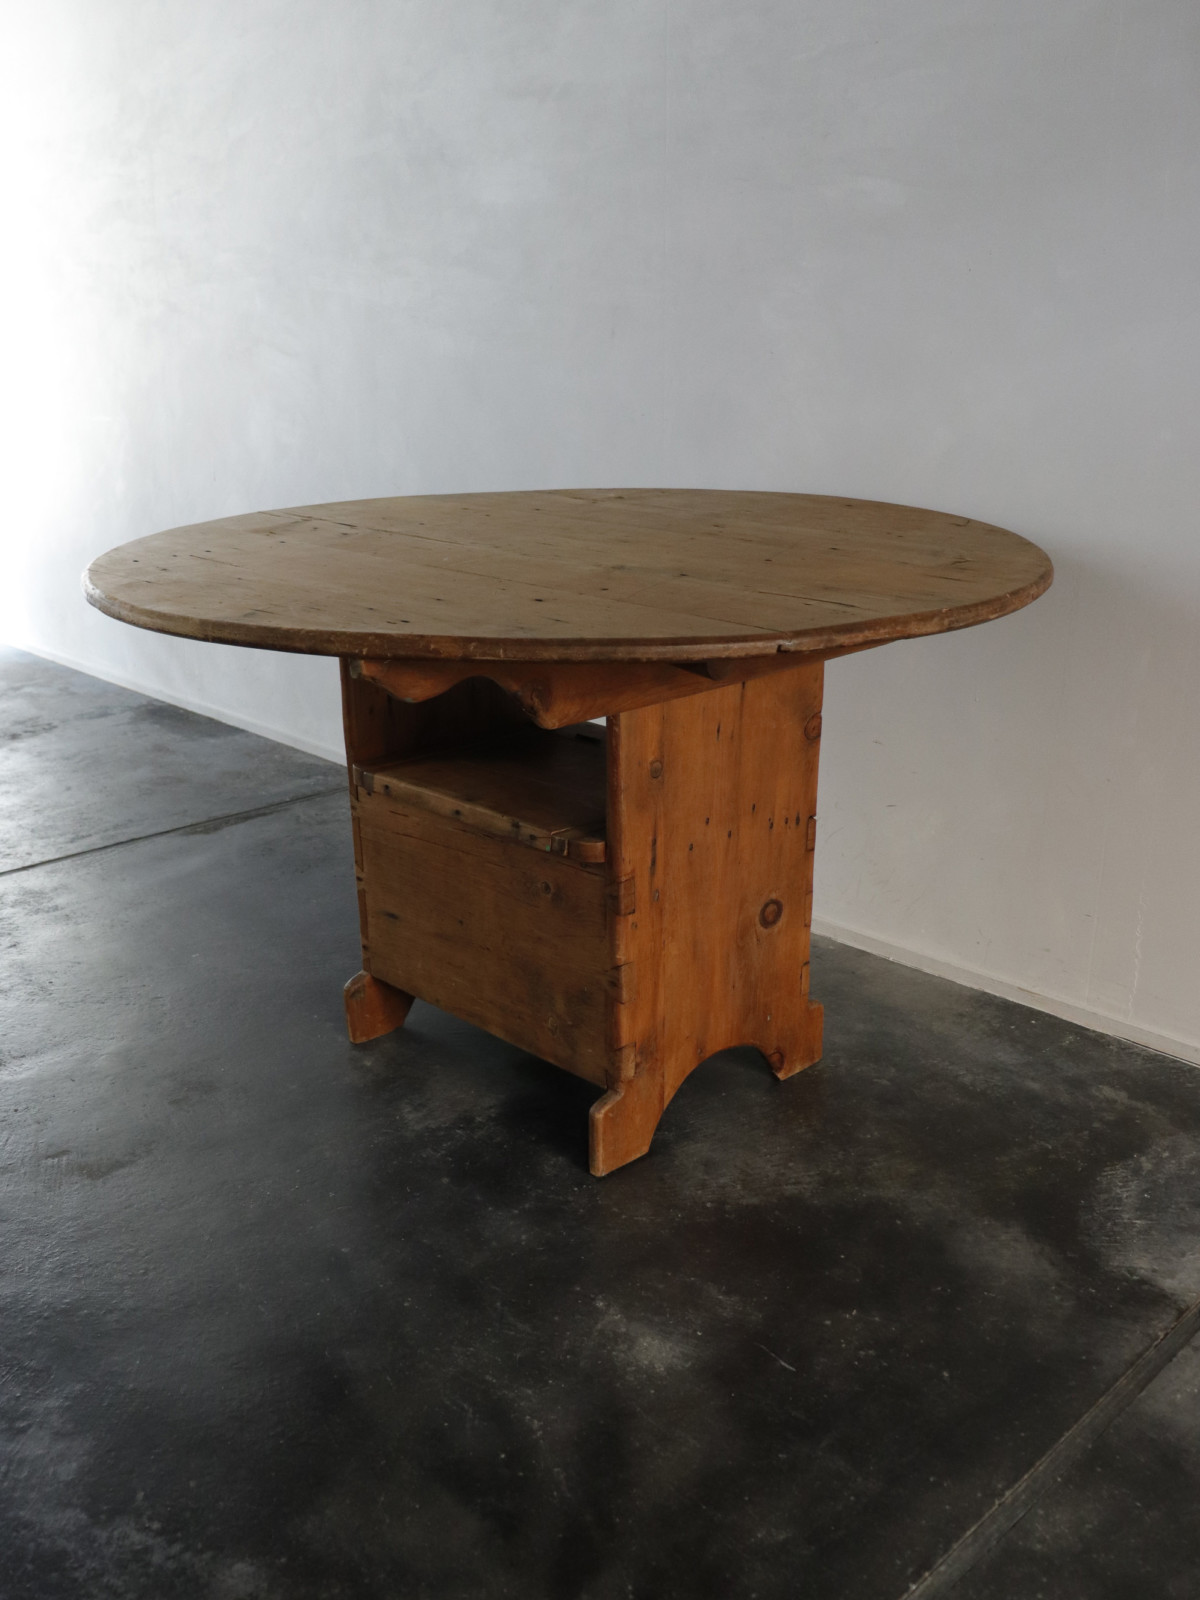 1880's,winery table,France,pine wood